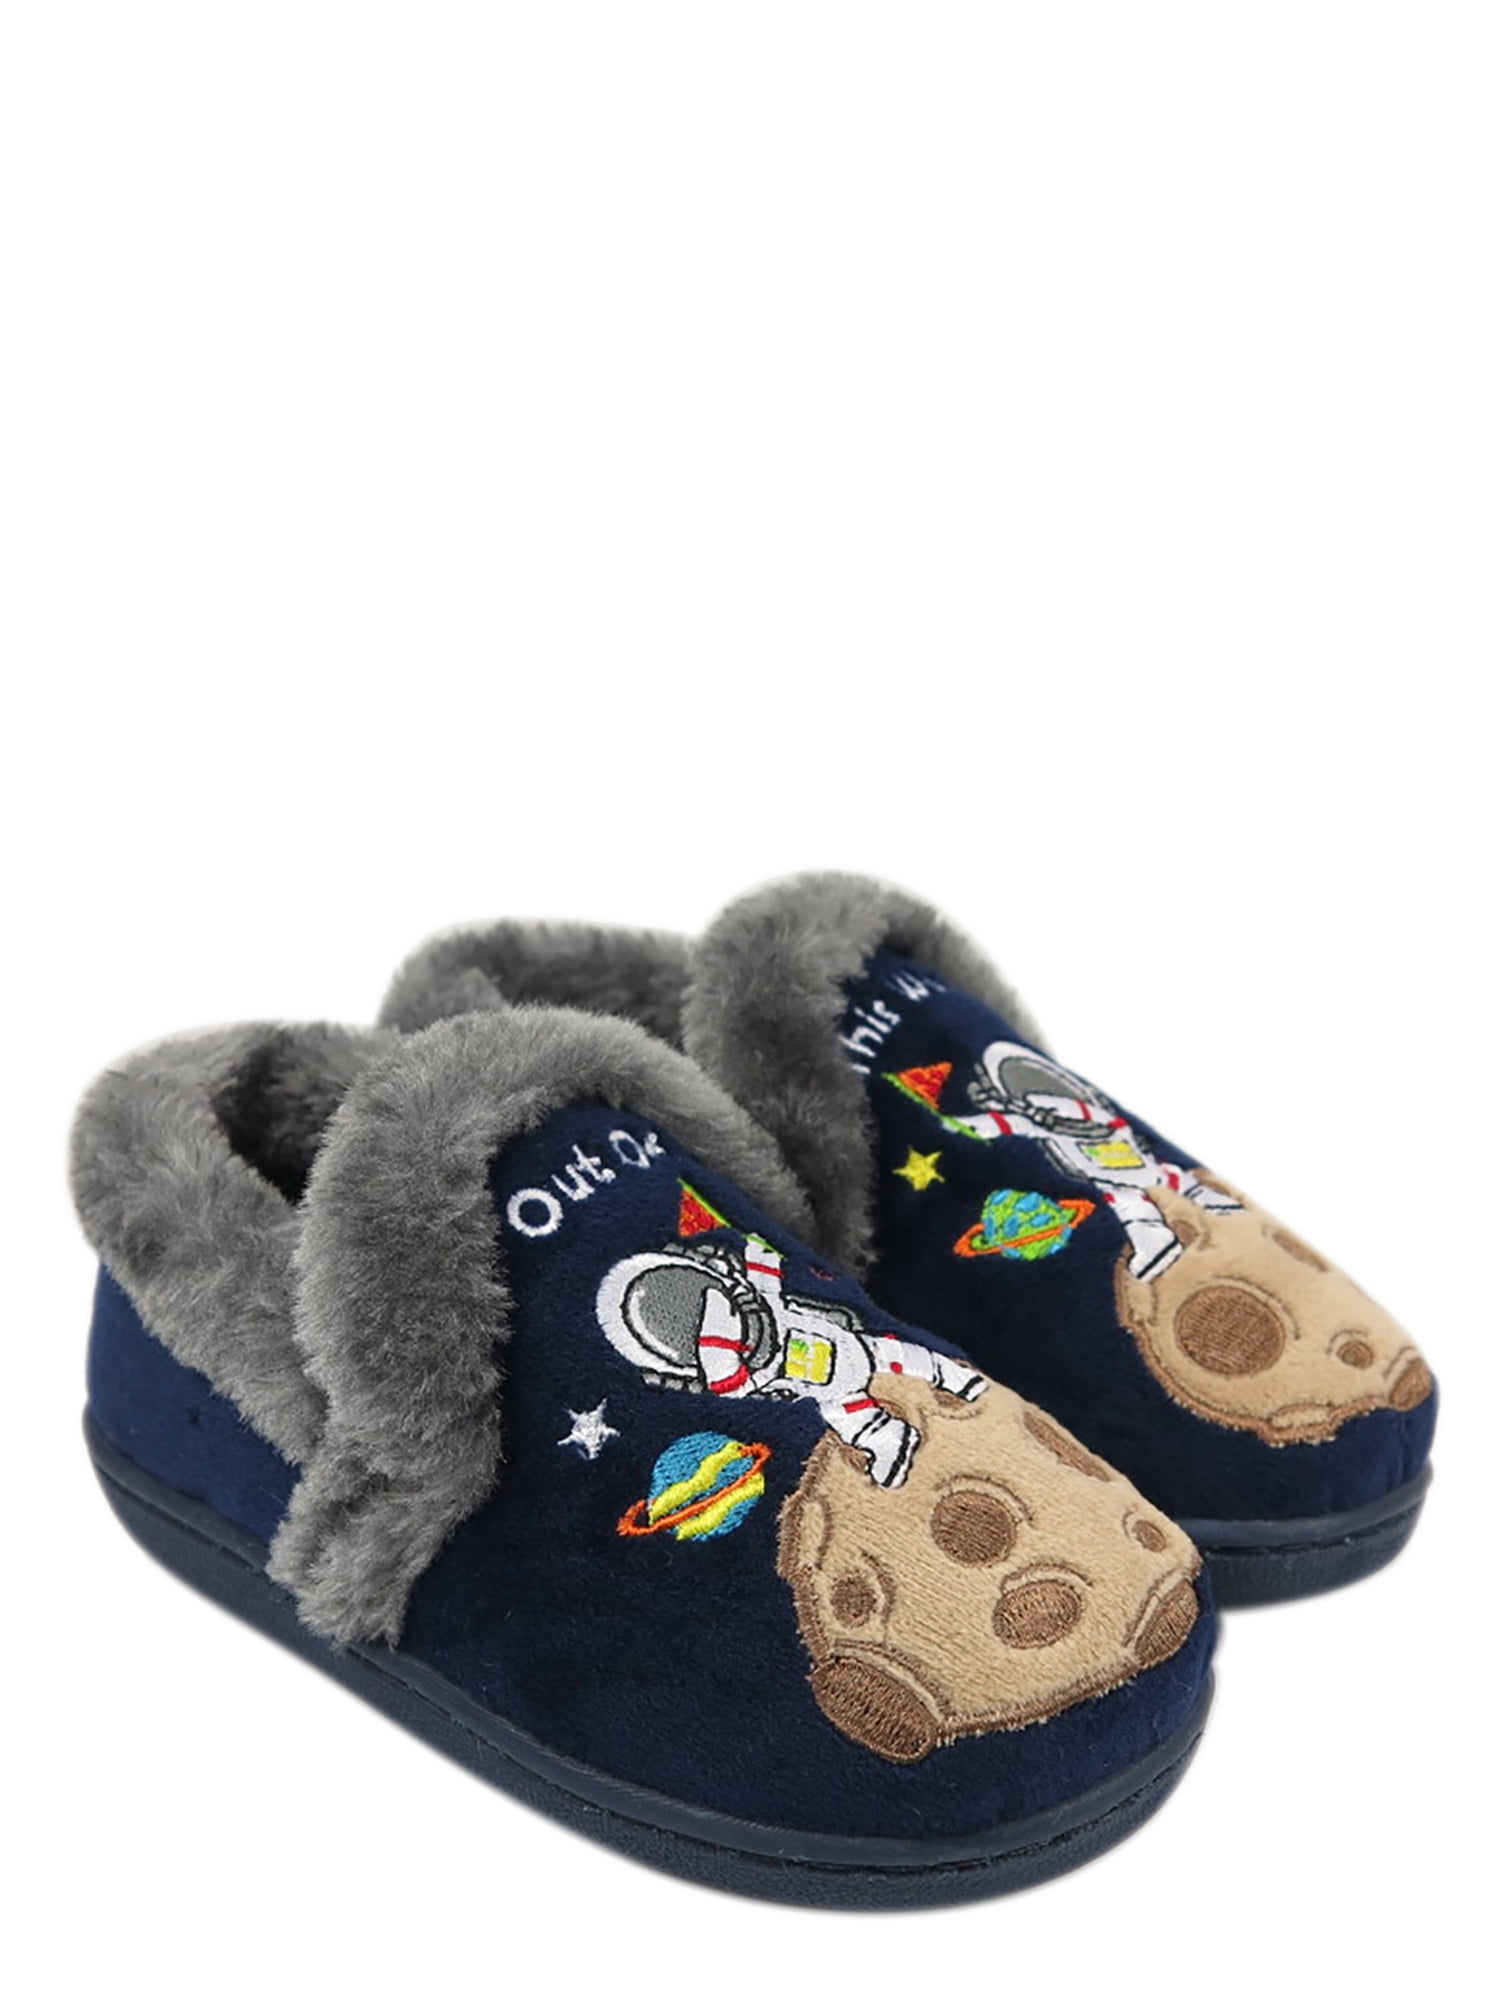 boys space slippers